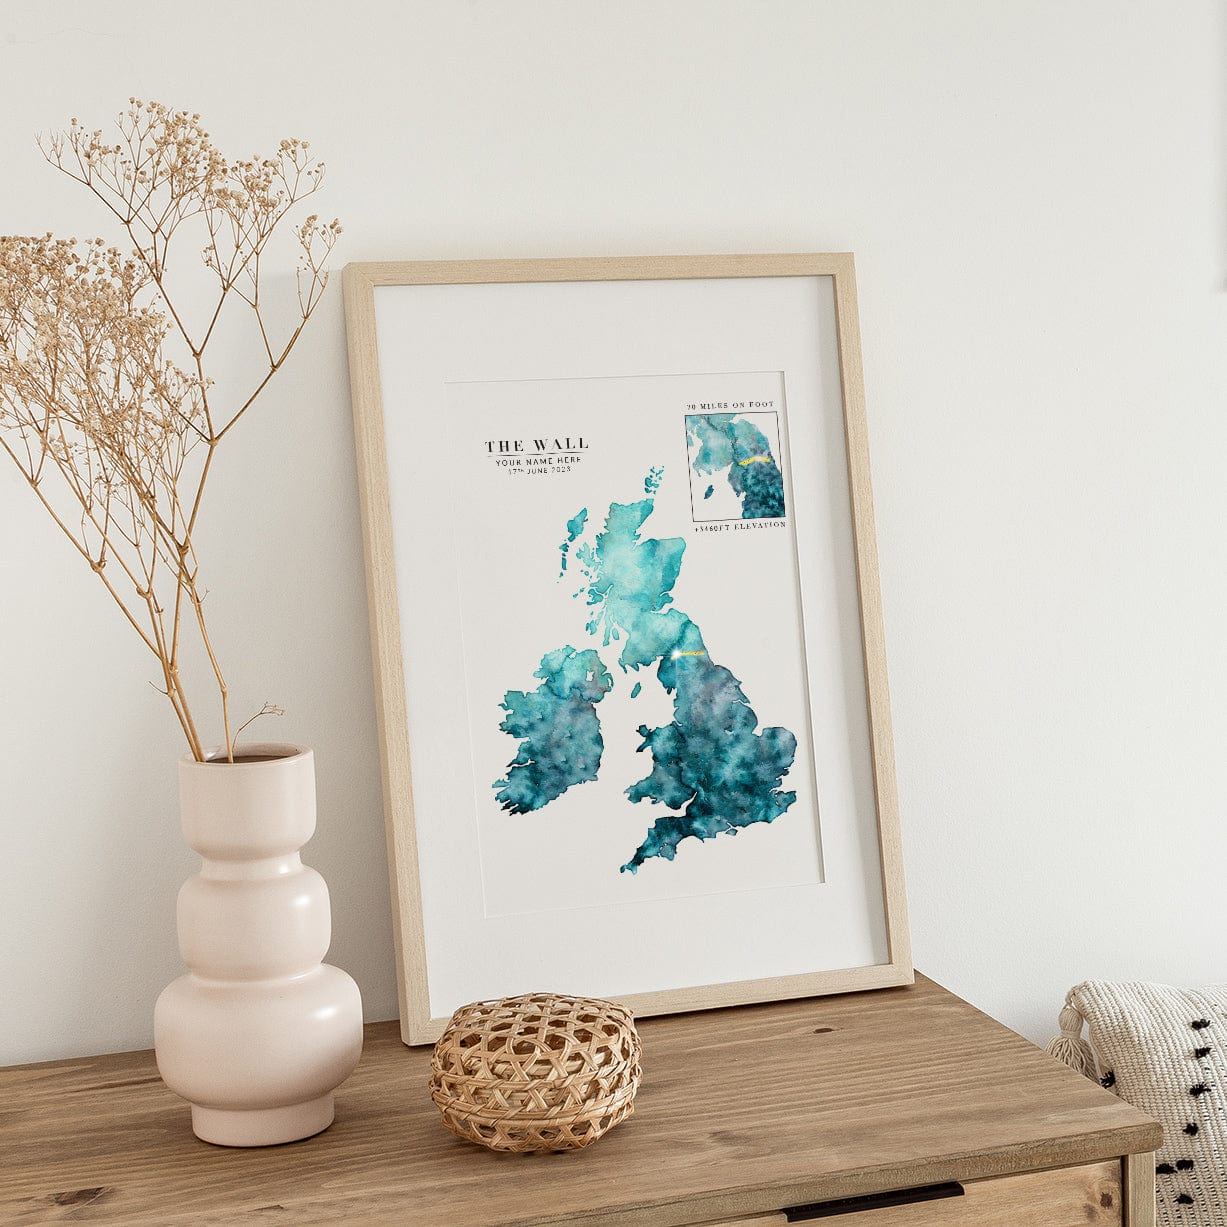 EJayDesign A3 Unframed (29.7 x 42cm) / Turquoise UK: The Wall - Rat Race Map